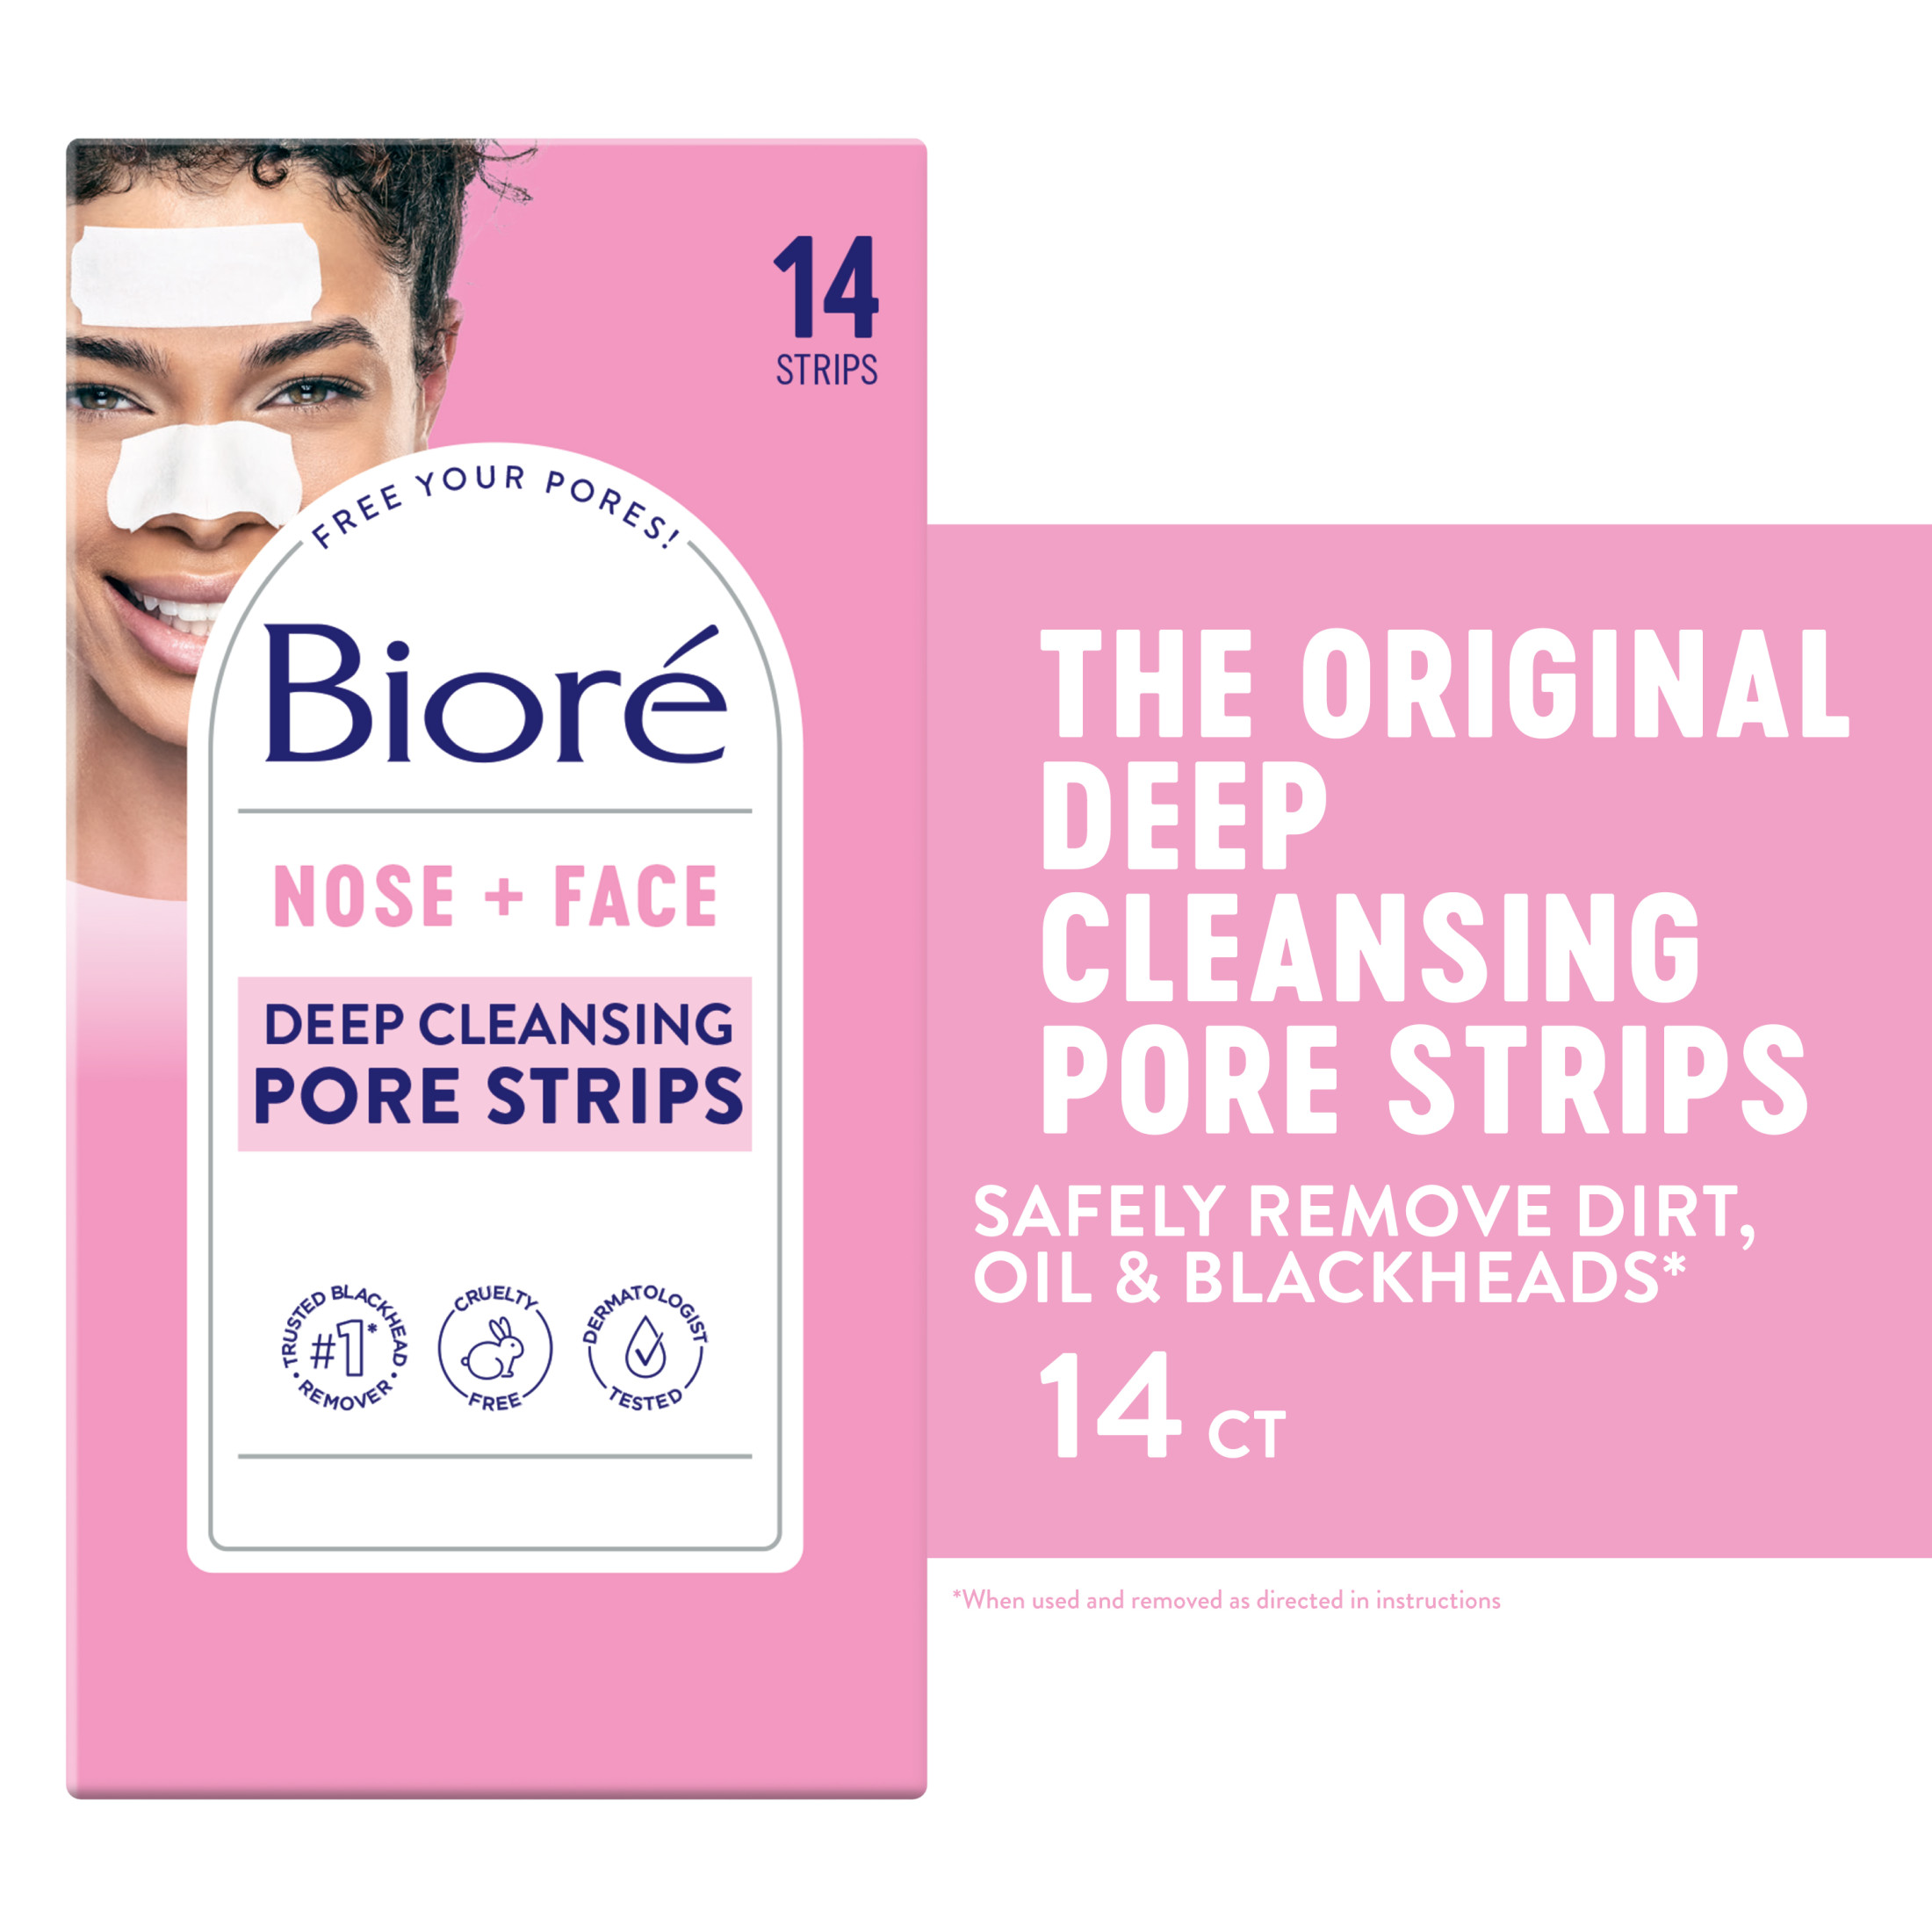 Biore Original Nose+Face Deep Cleansing Blackhead Remover Pore Strips, 7 Nose + 7 Face Strips, 14 Ct - image 1 of 10